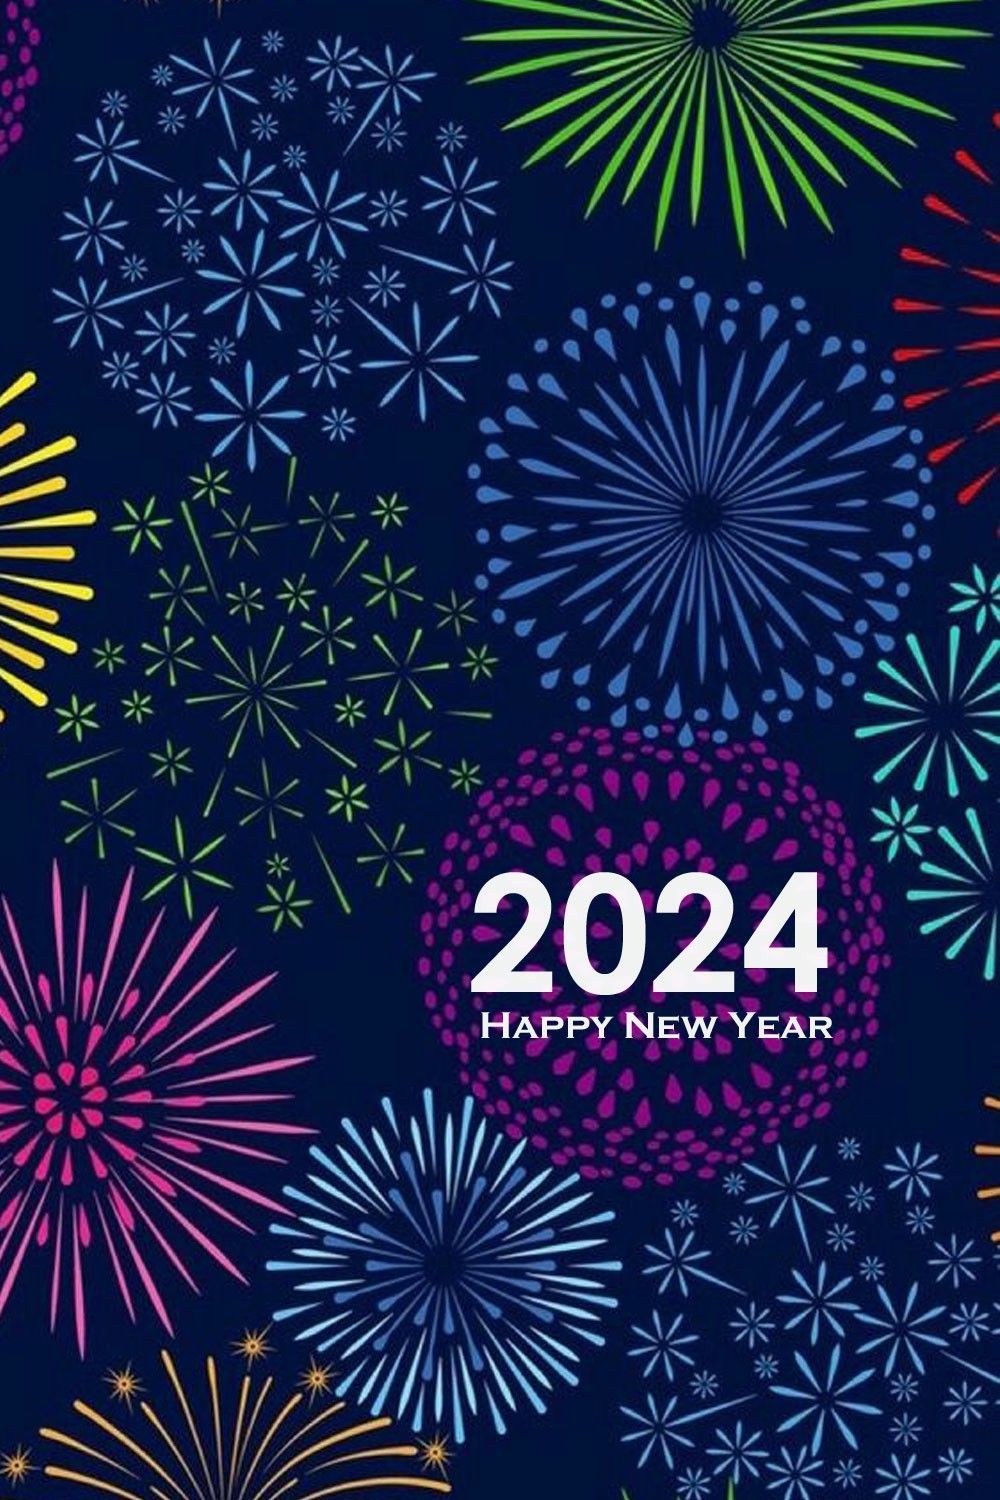 Happy New Year 2024. Happy new year picture, Happy new year, New year wishes cards